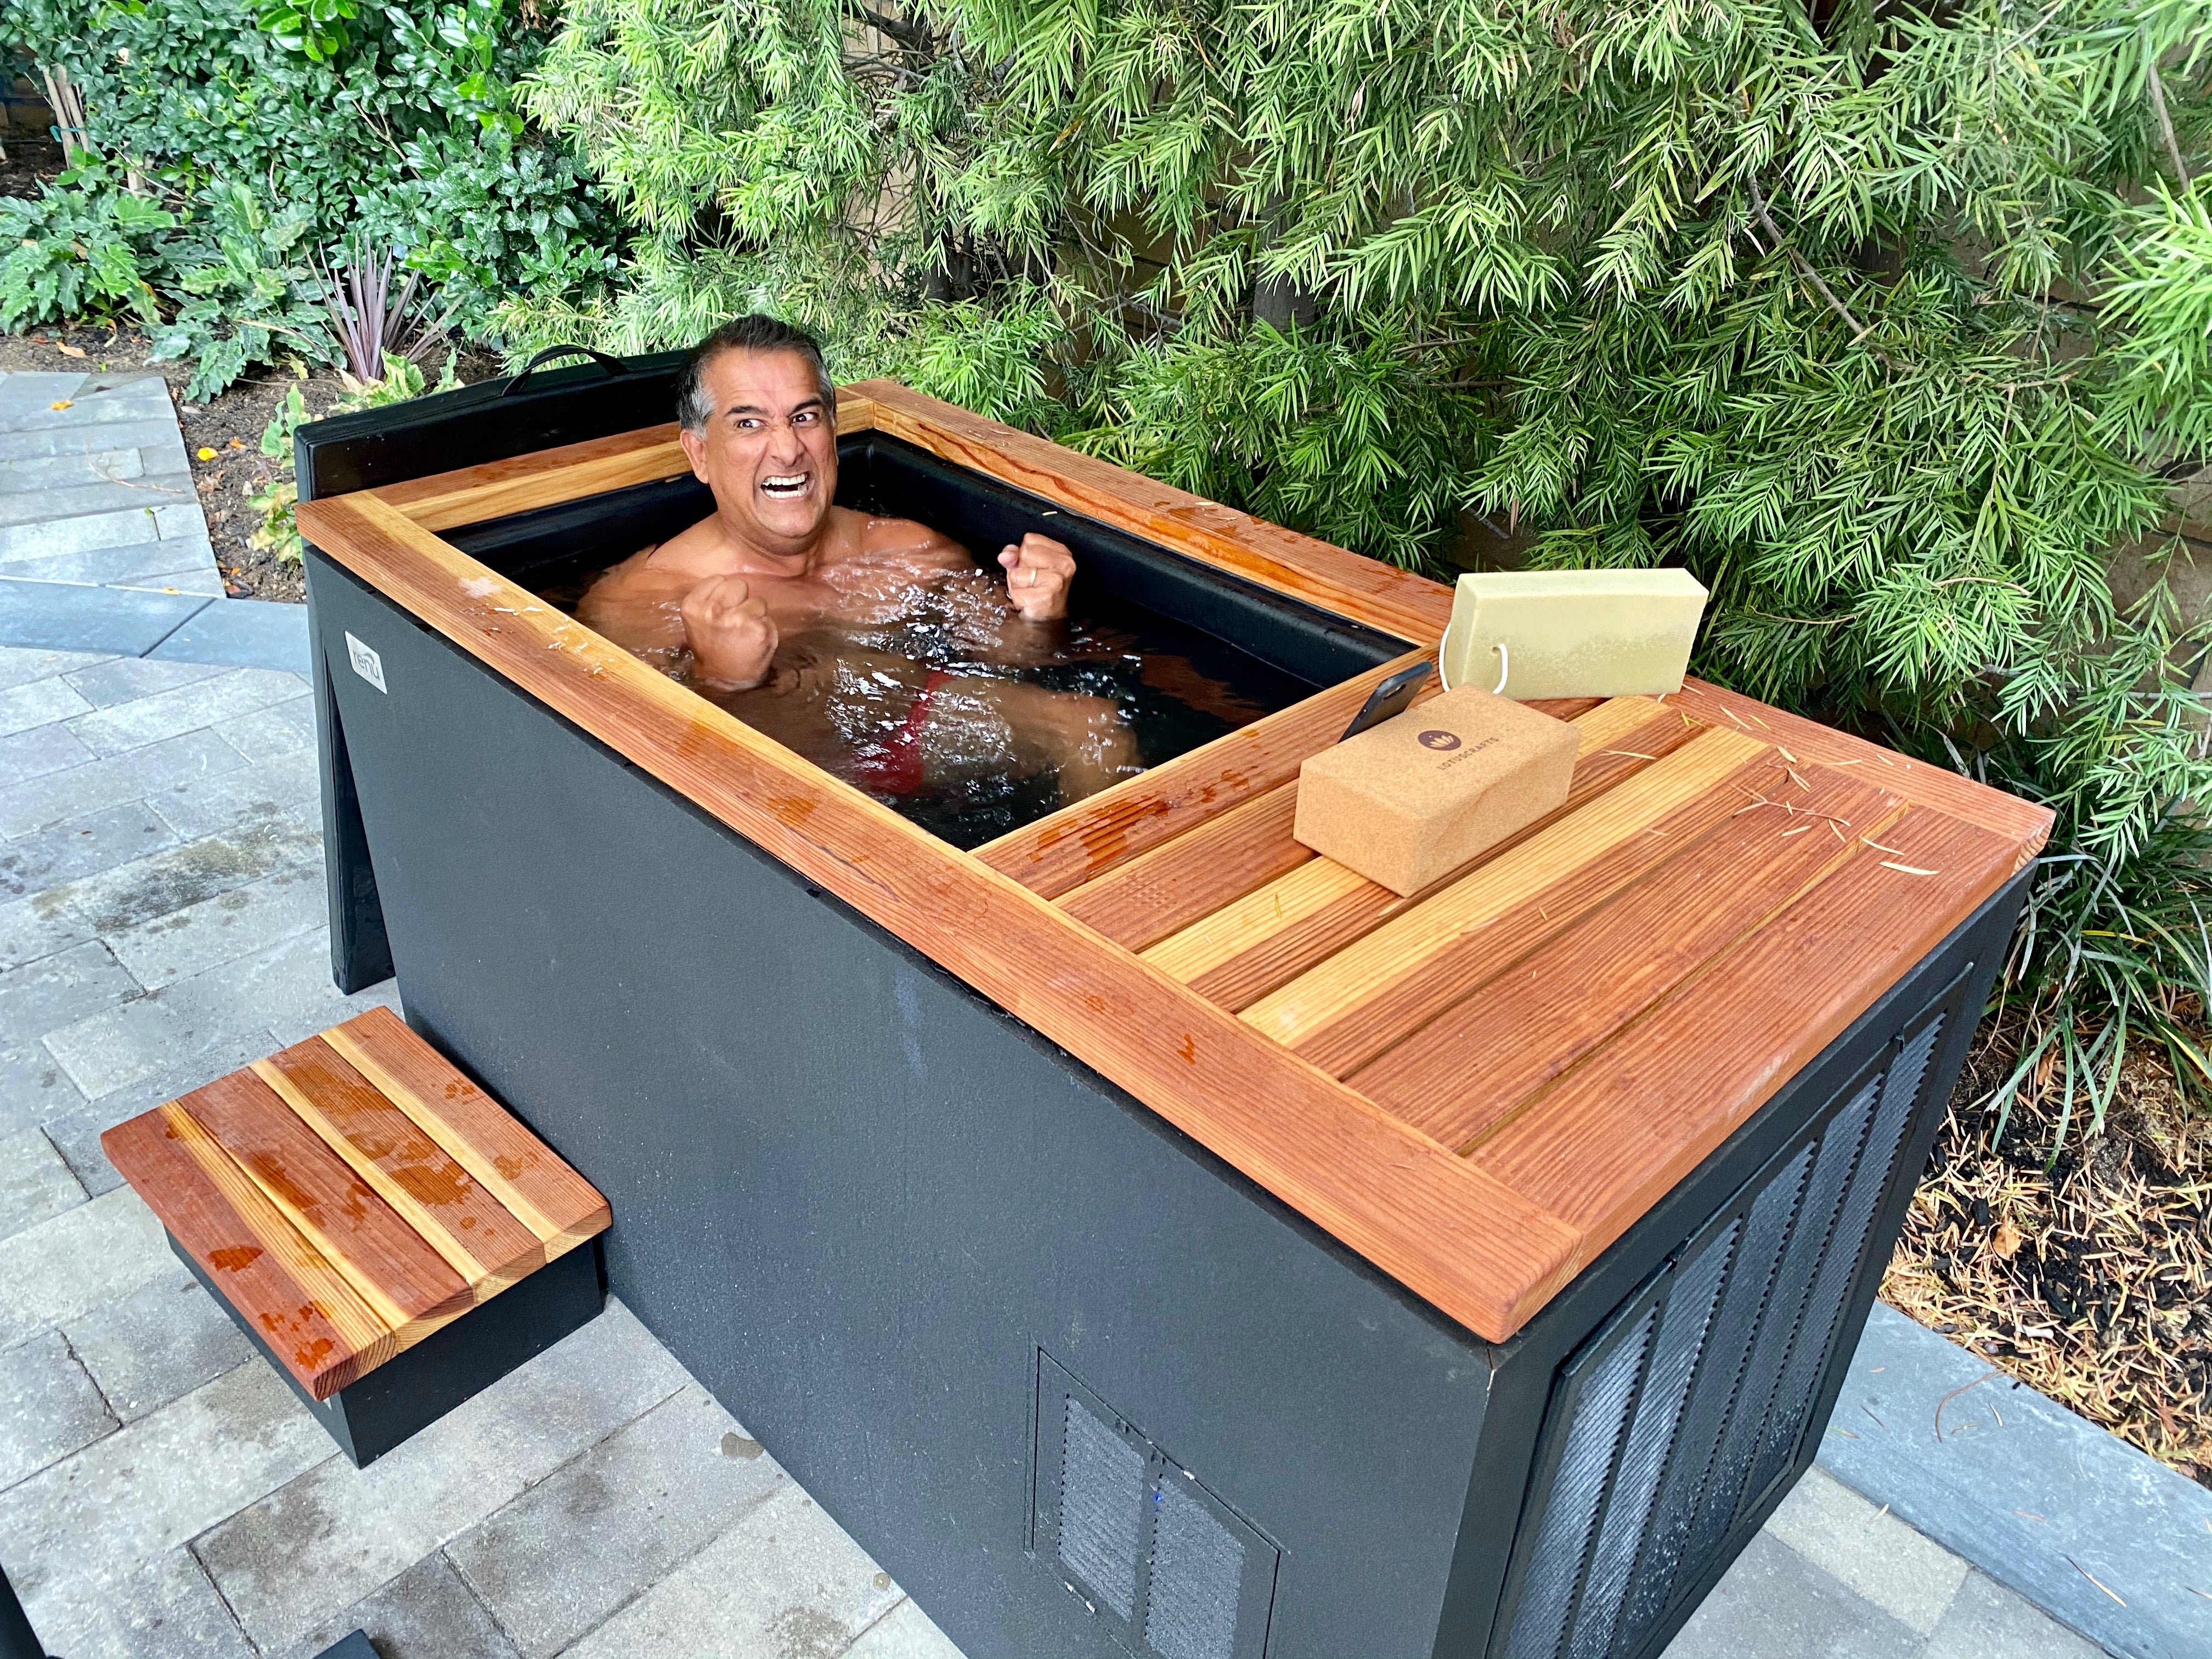 How to Convert a Hot Tub to a Cool Plunge